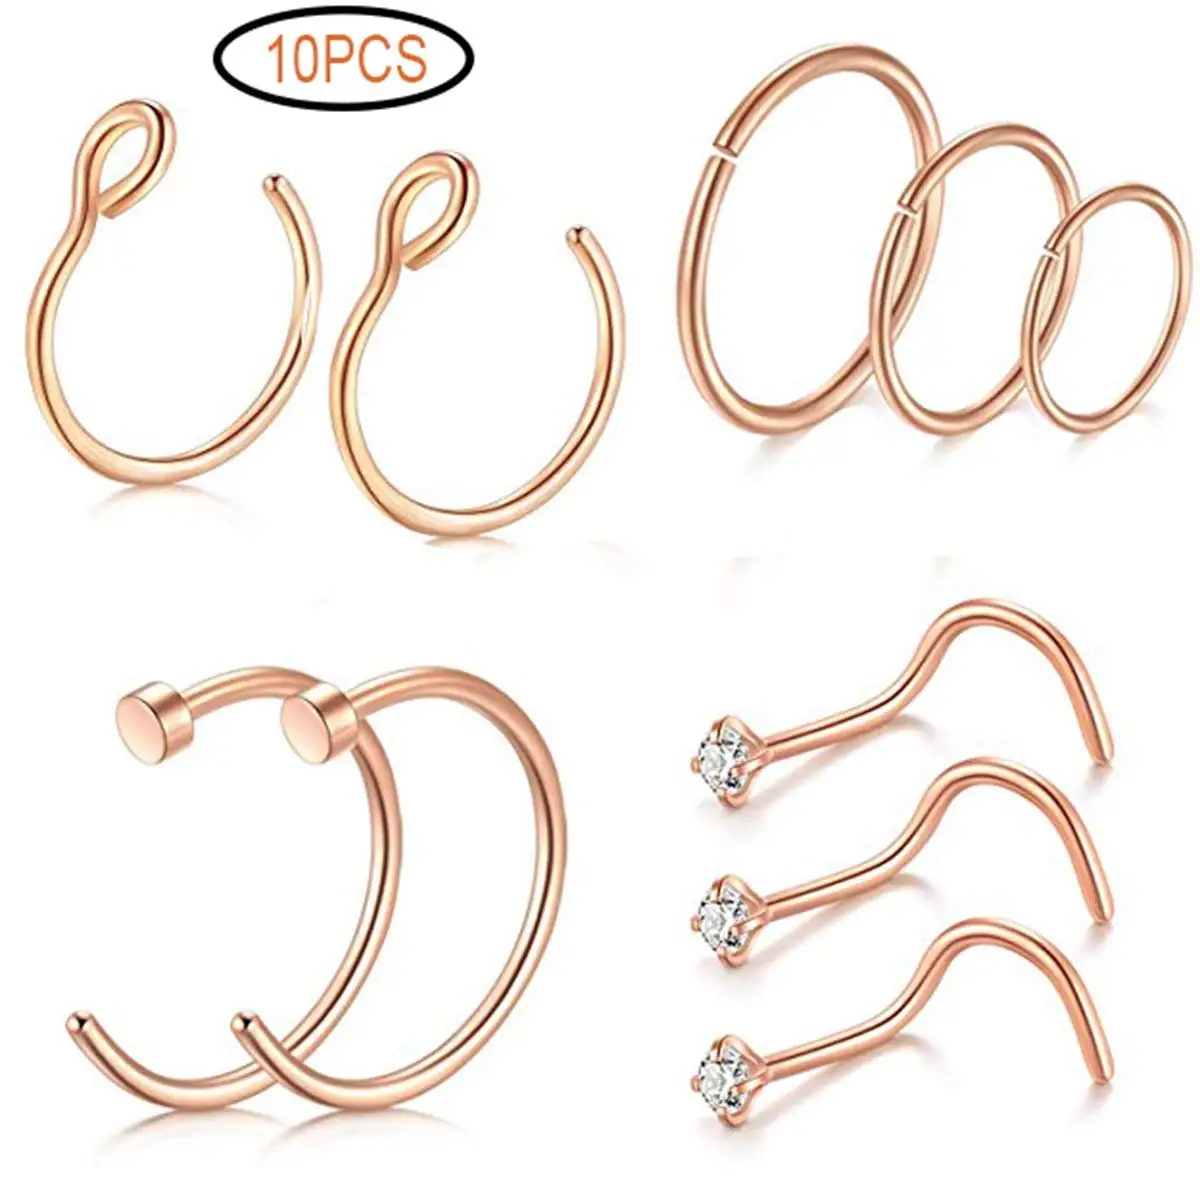 Cheap 6mm Nose Ring, find 6mm Nose Ring deals on line at